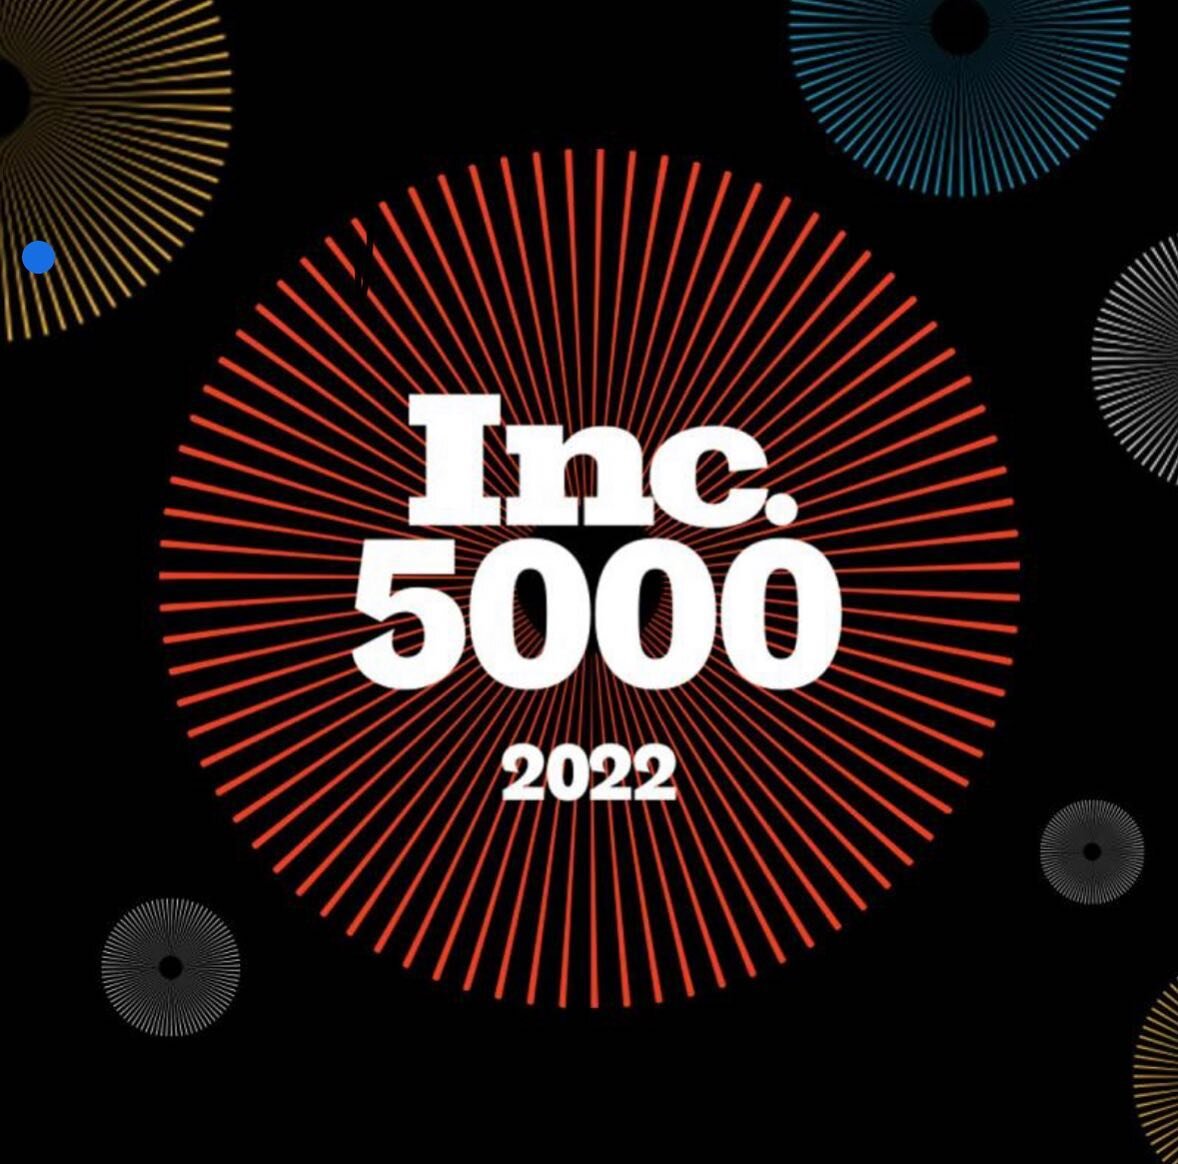 Camfred Construction is a 2022 Inc. 5000 honoree!! Thank you to our clients, industry partners and team for helping us achieve this recognition!